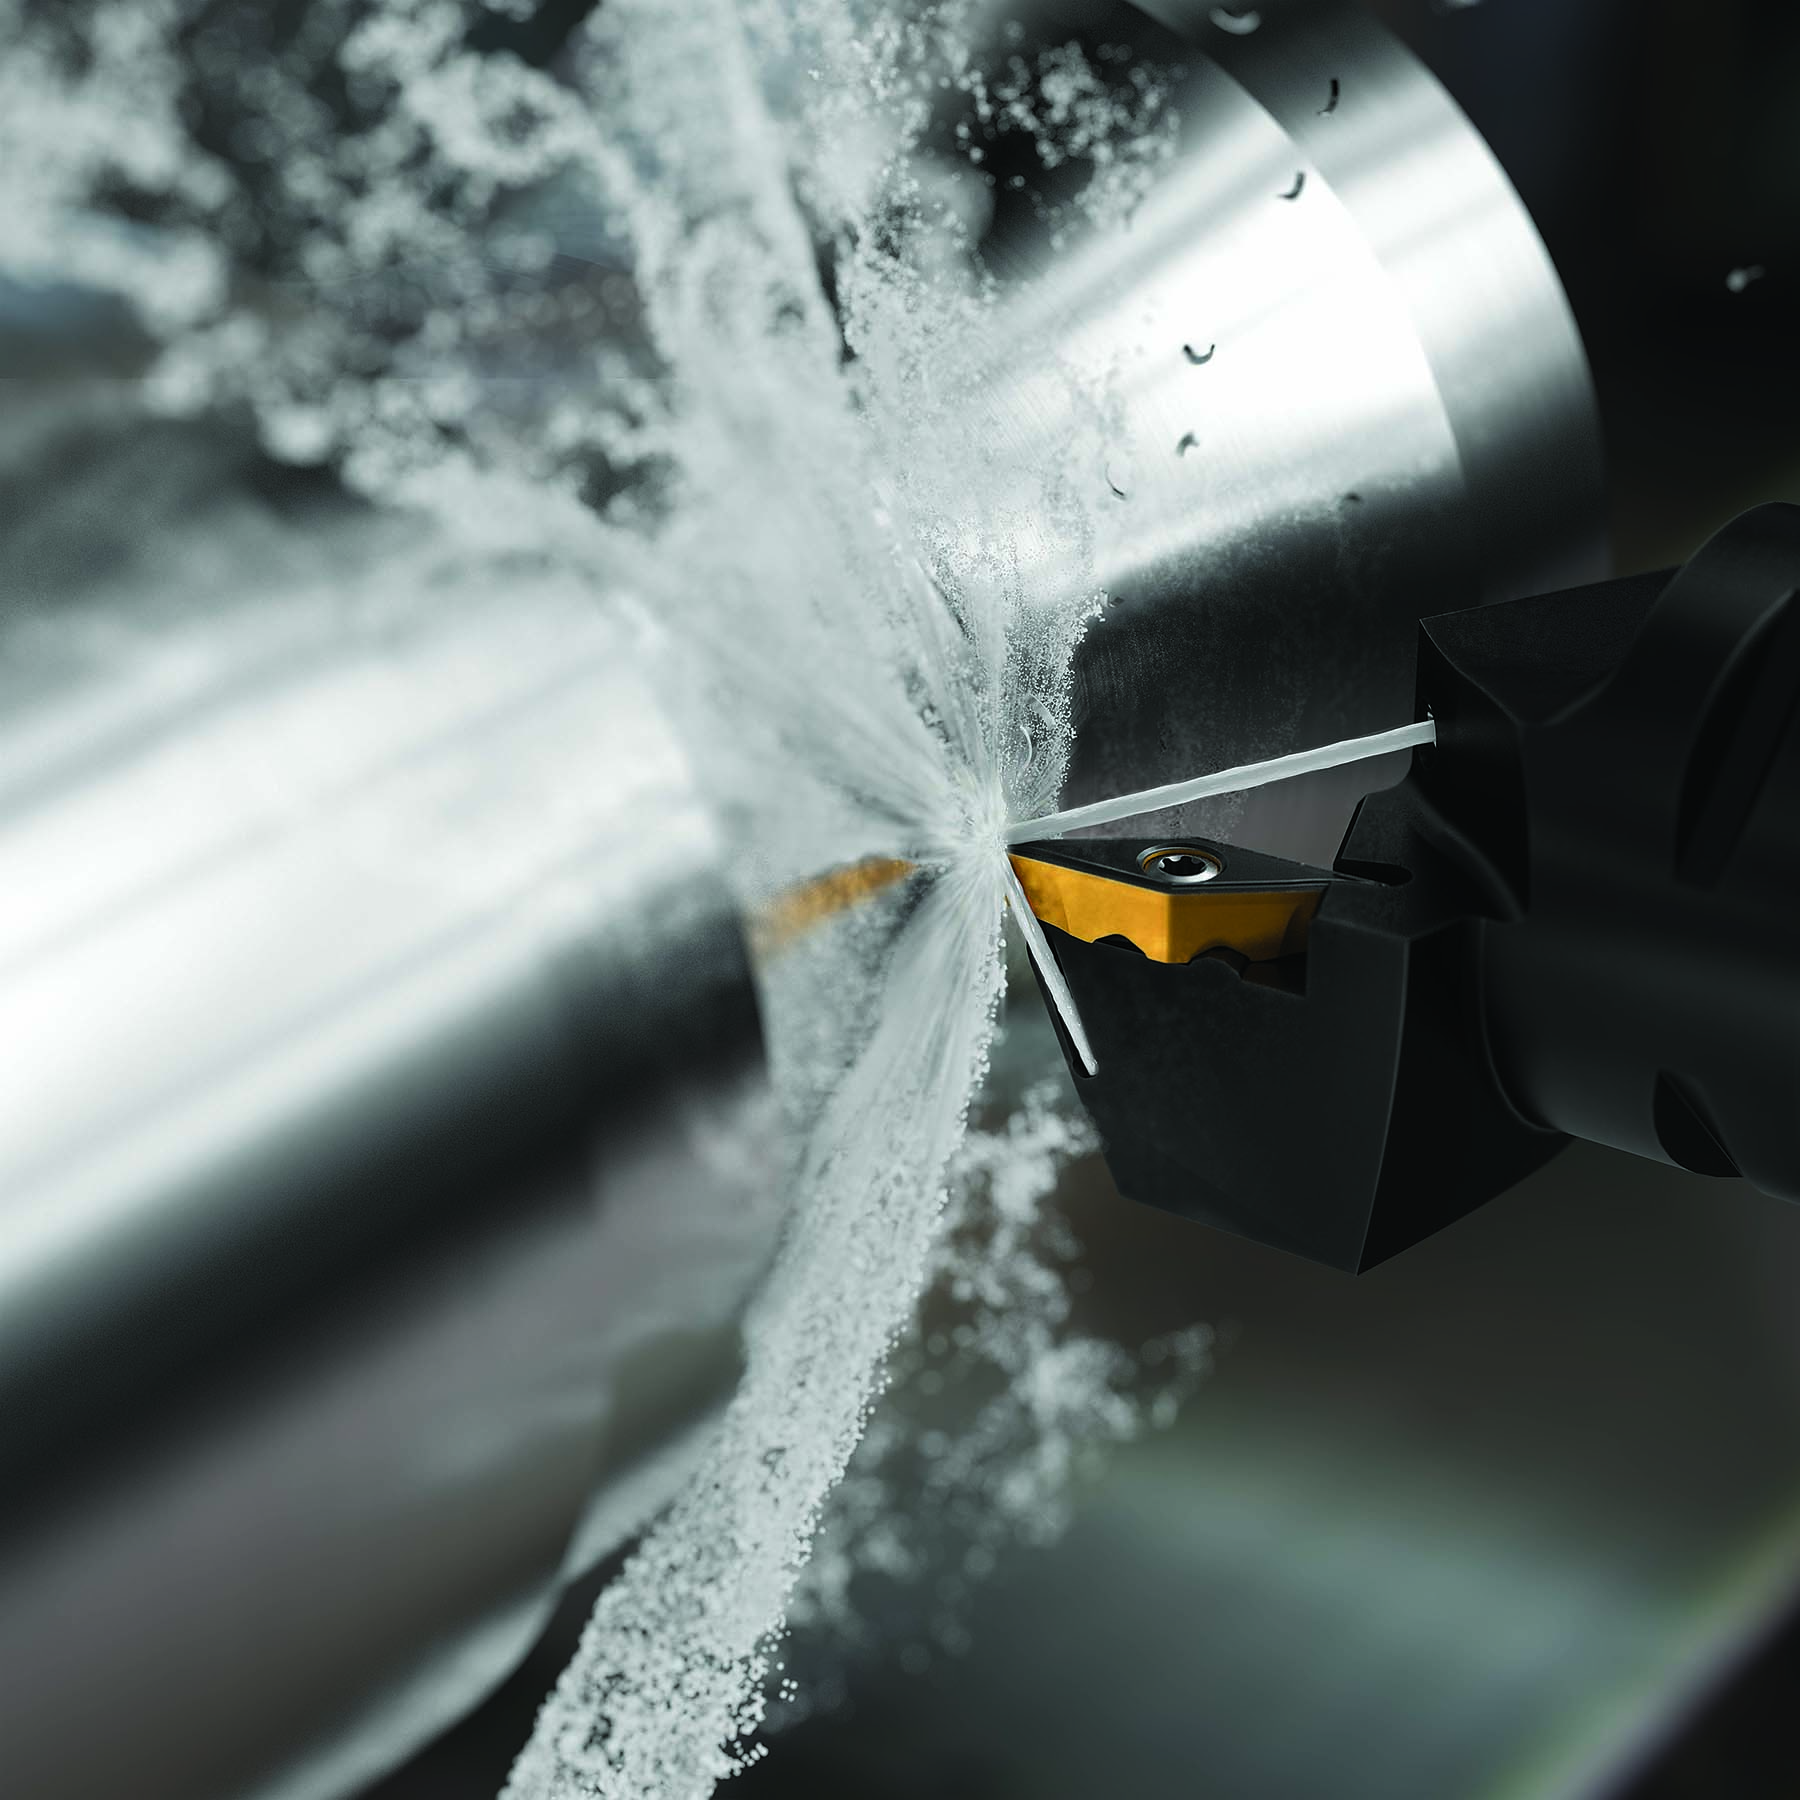 Machining aerospace materials can be difficult, but tools and techniques are available to help.